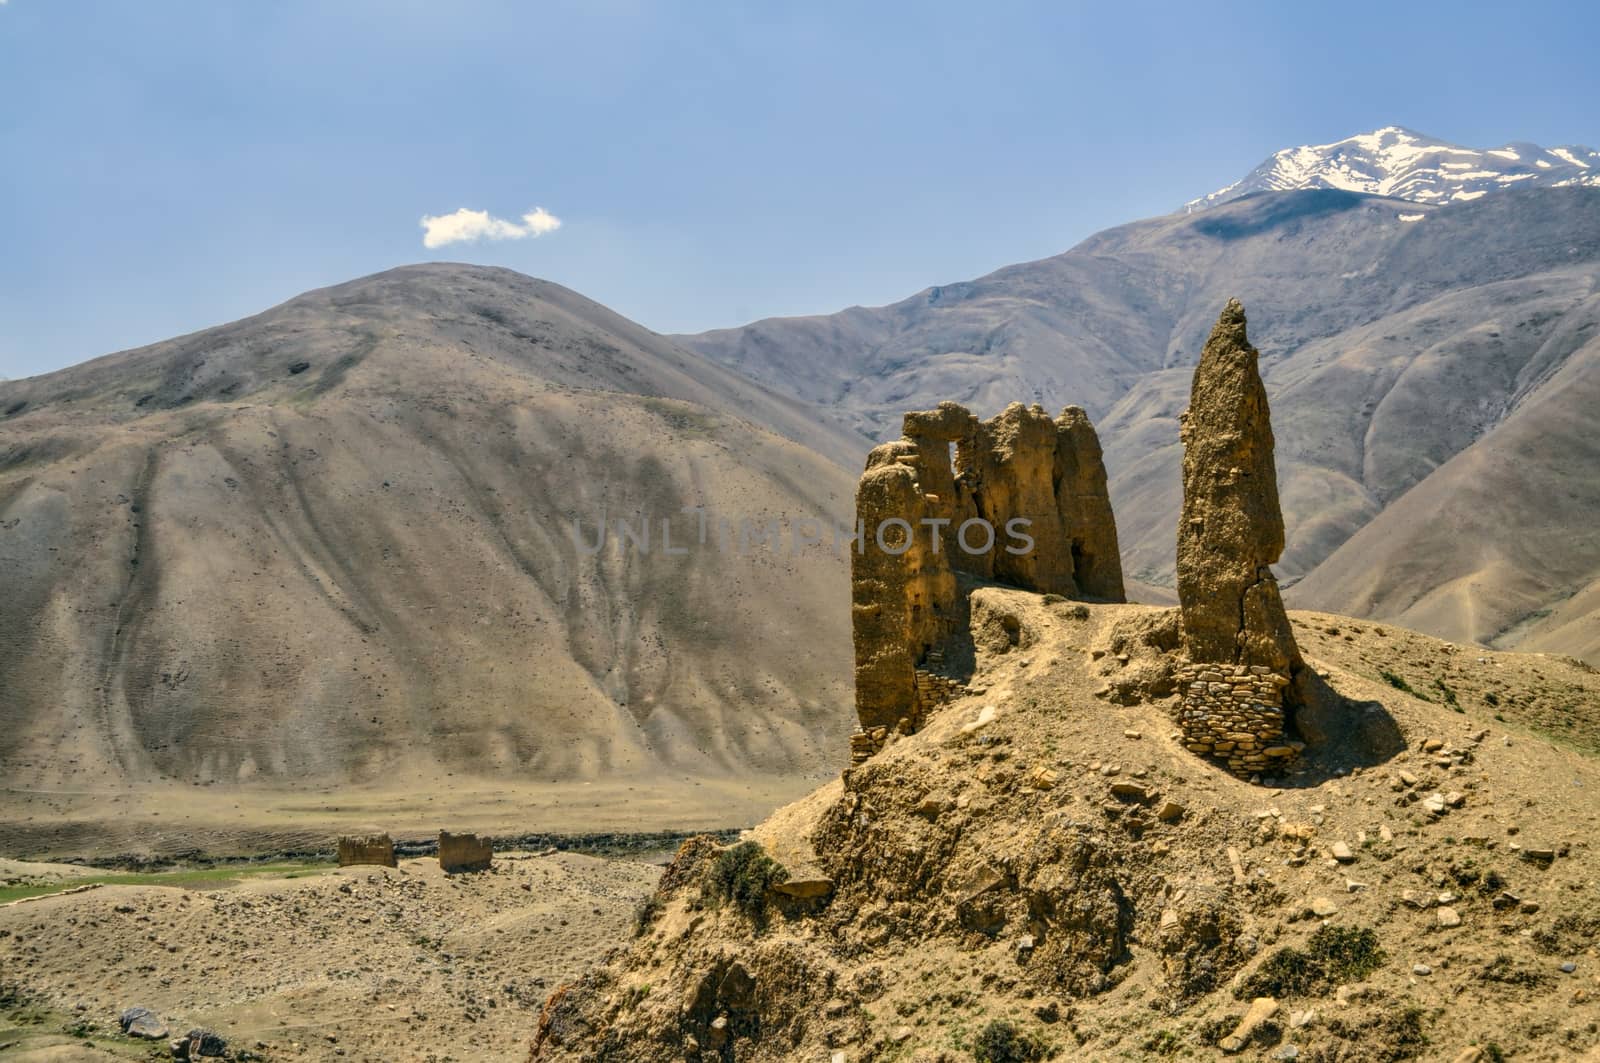 Scenic old ruins of buddhist shrines in Himalayas mountains in Nepal